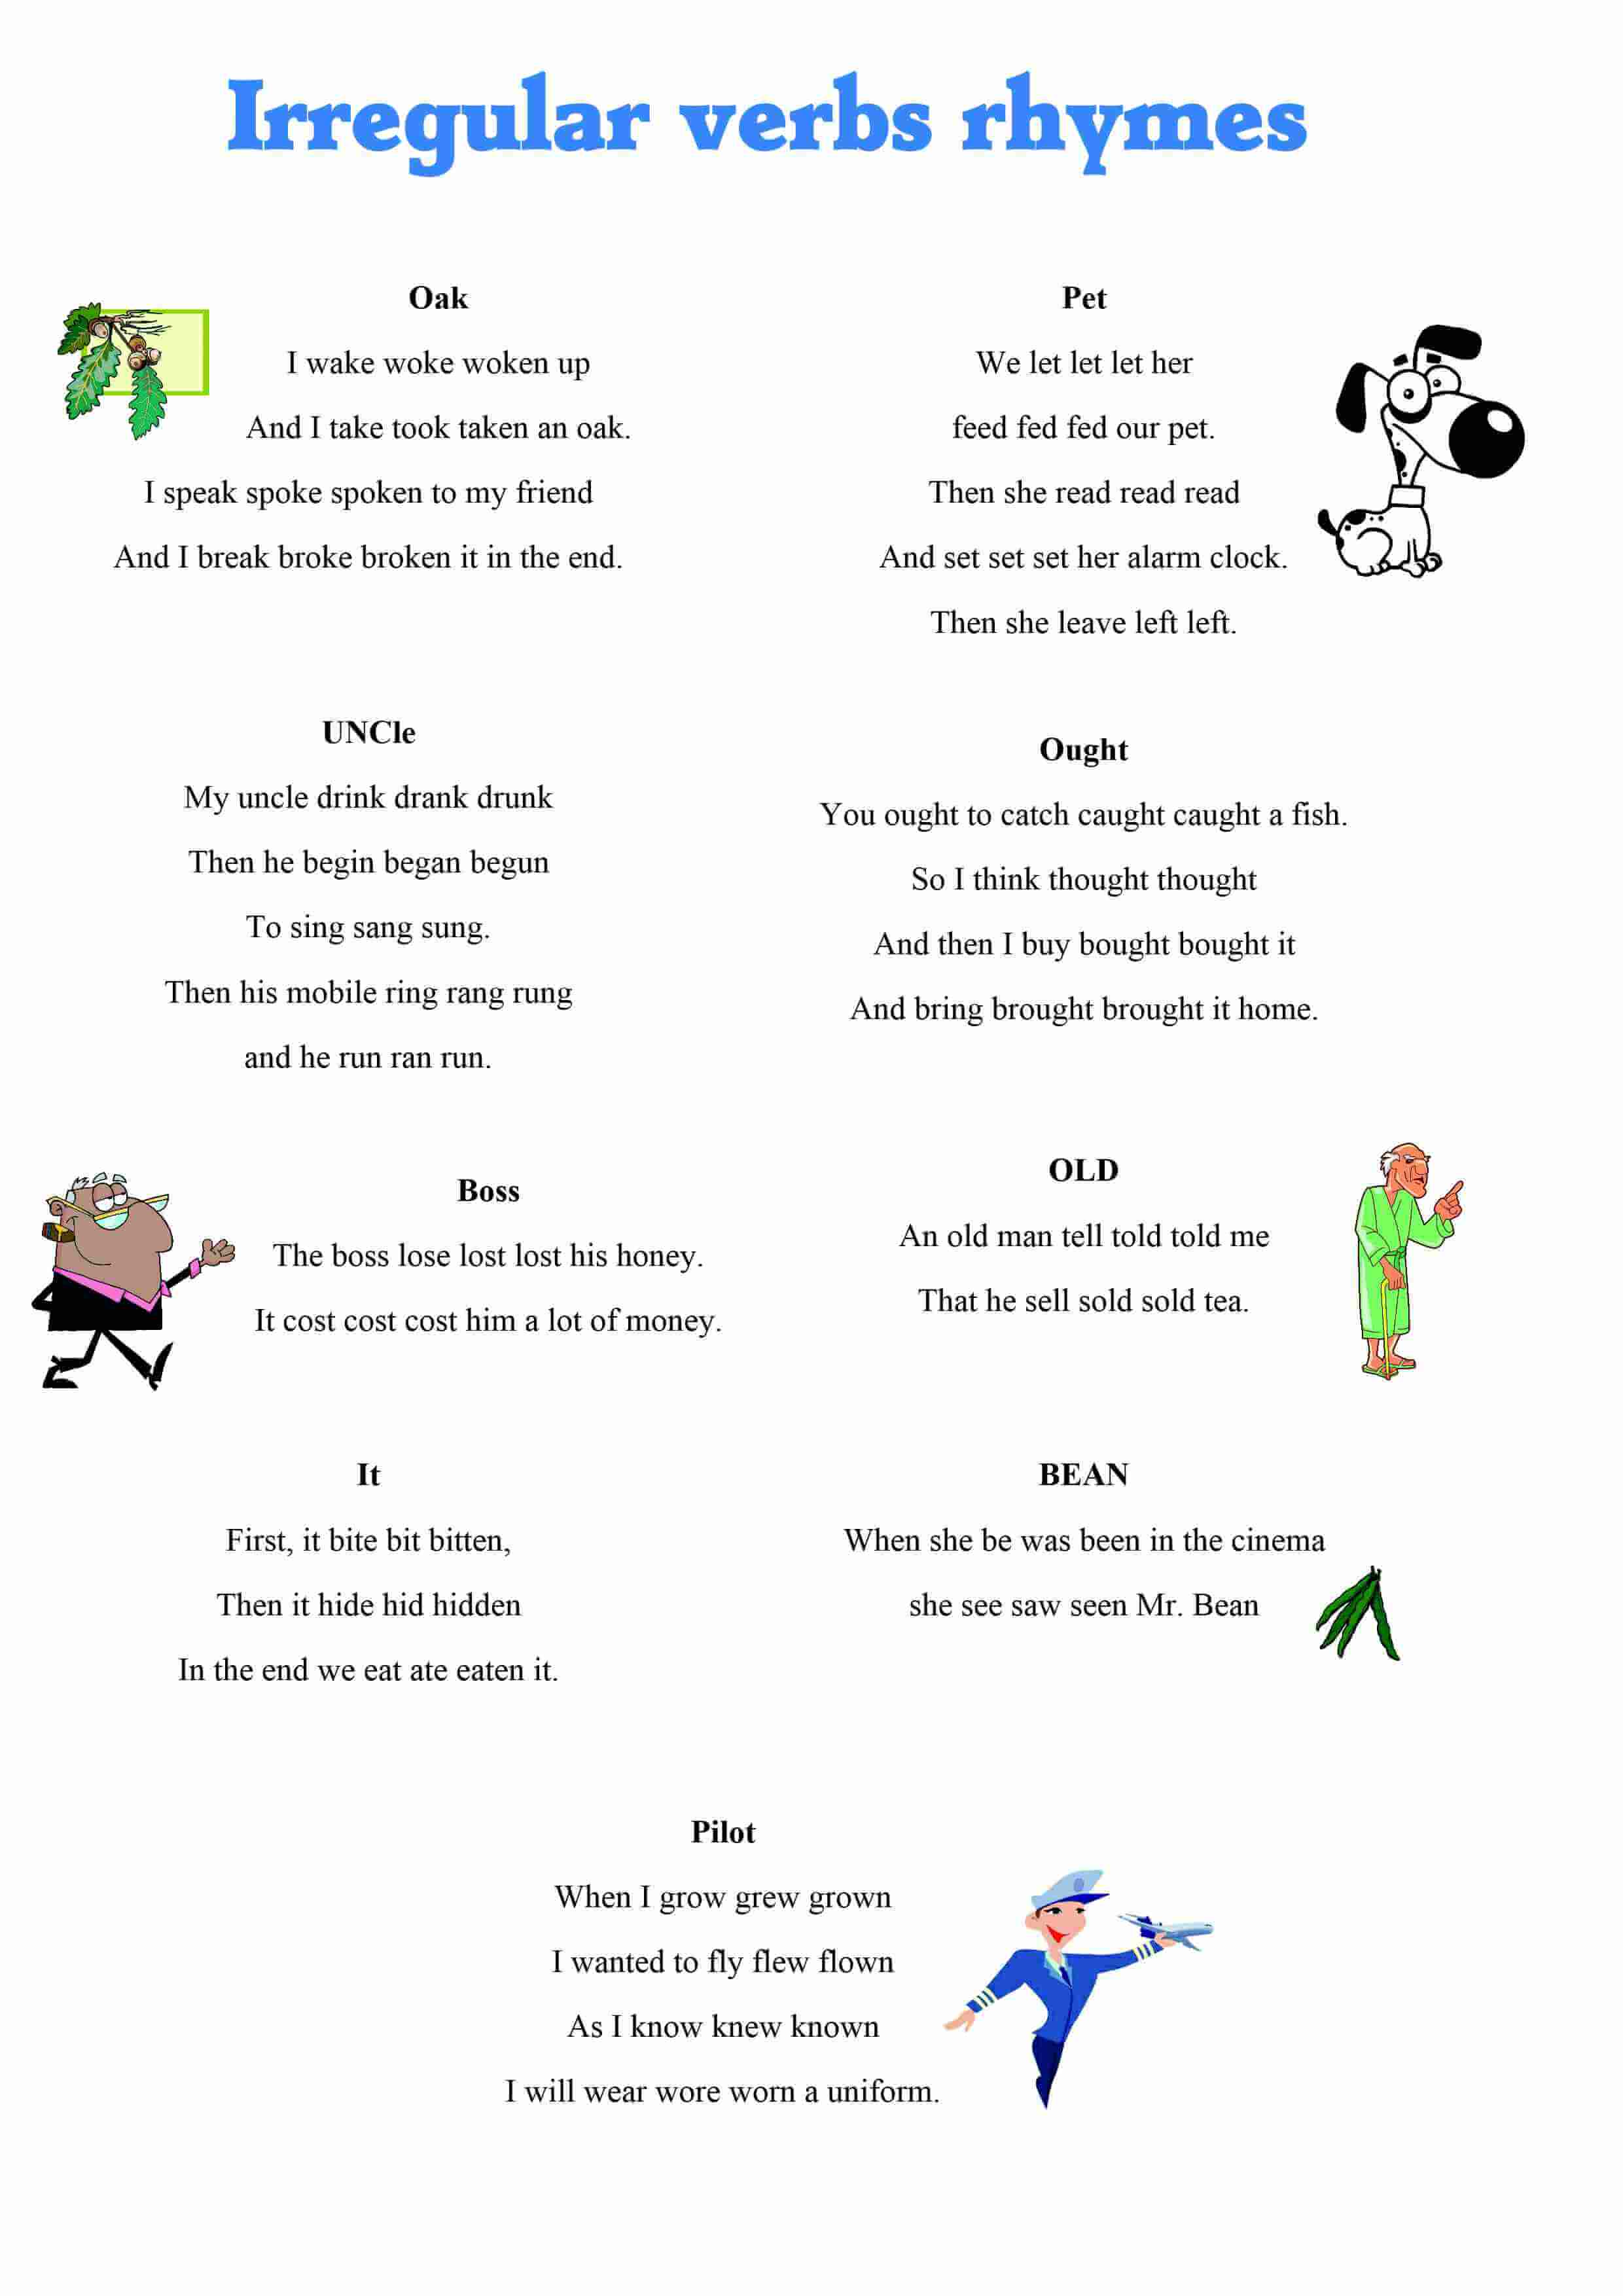 Irregular verbs rhymes picture web